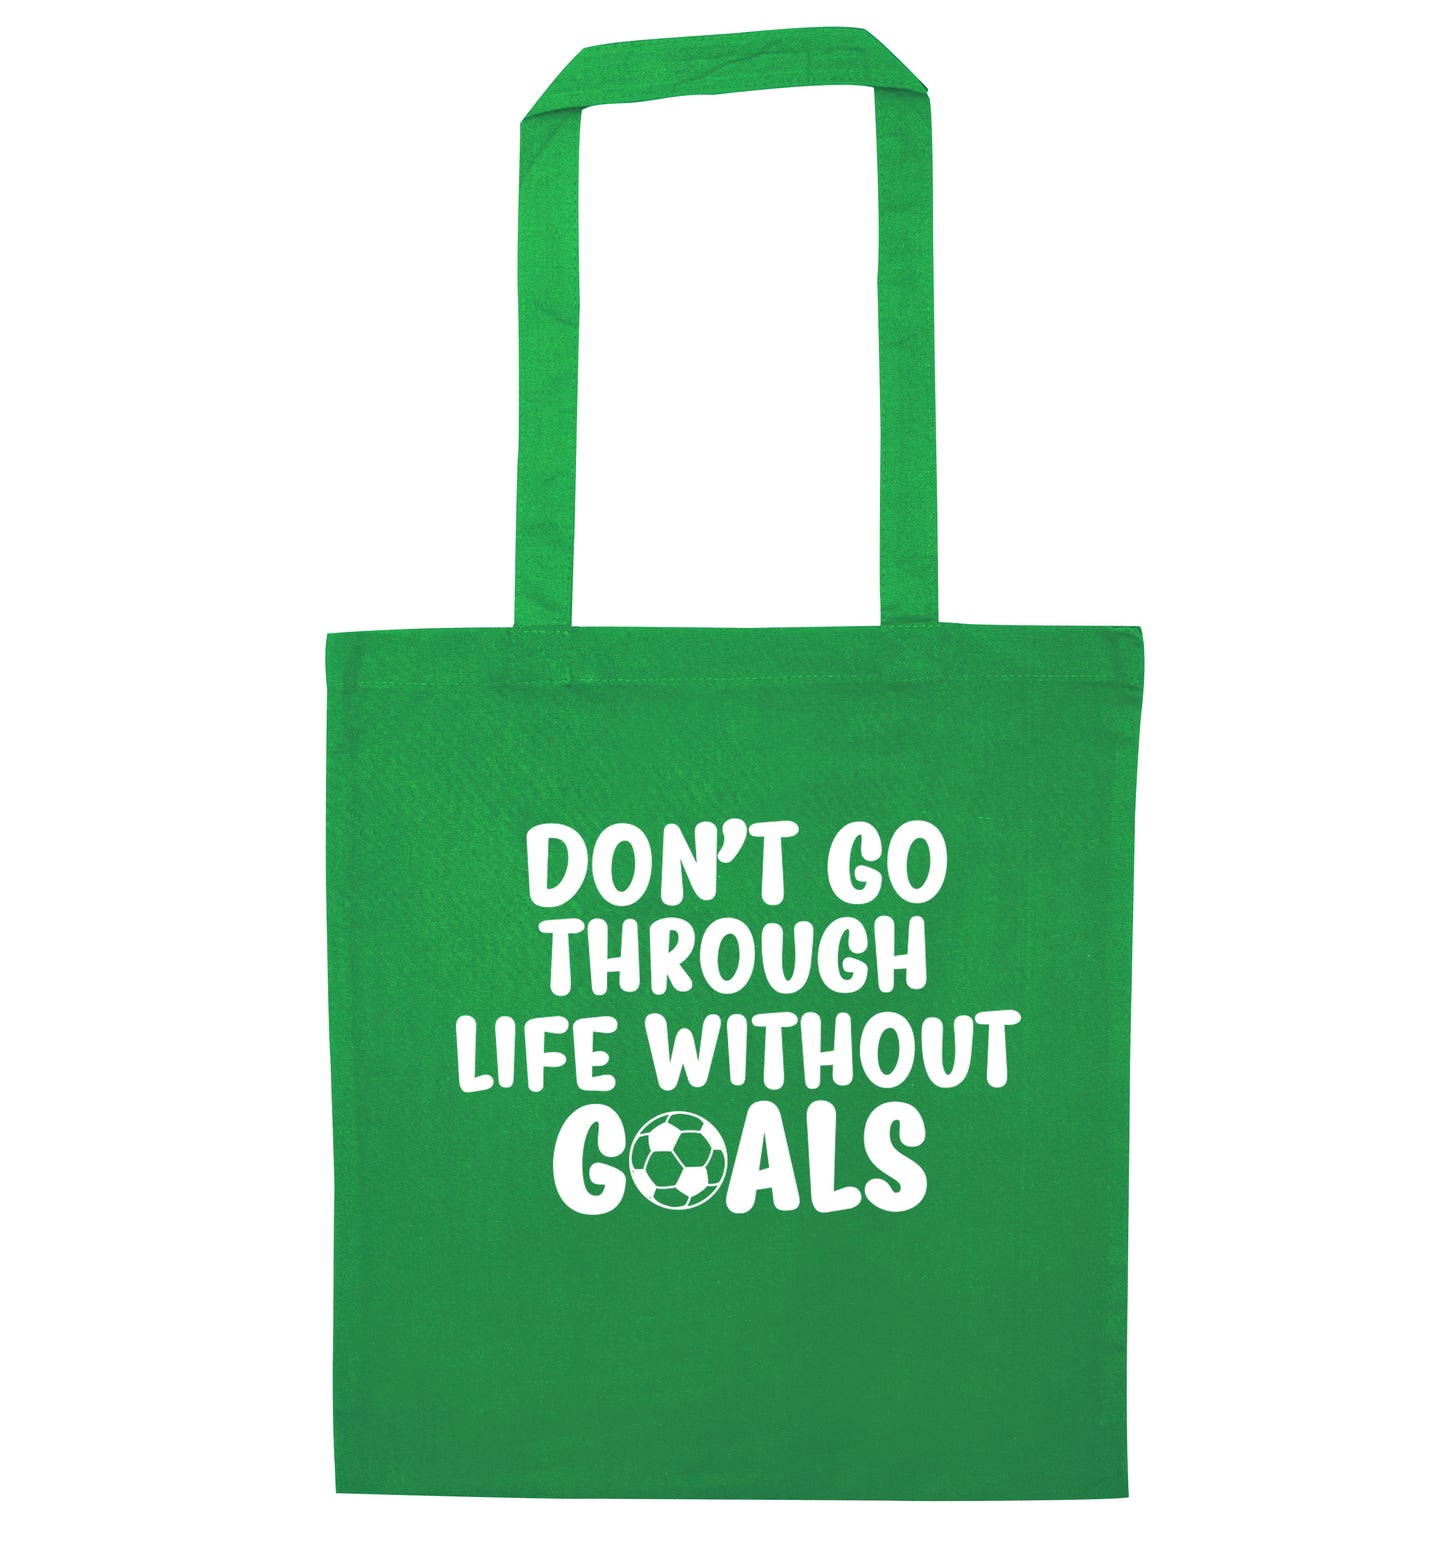 Don't go through life without goals green tote bag